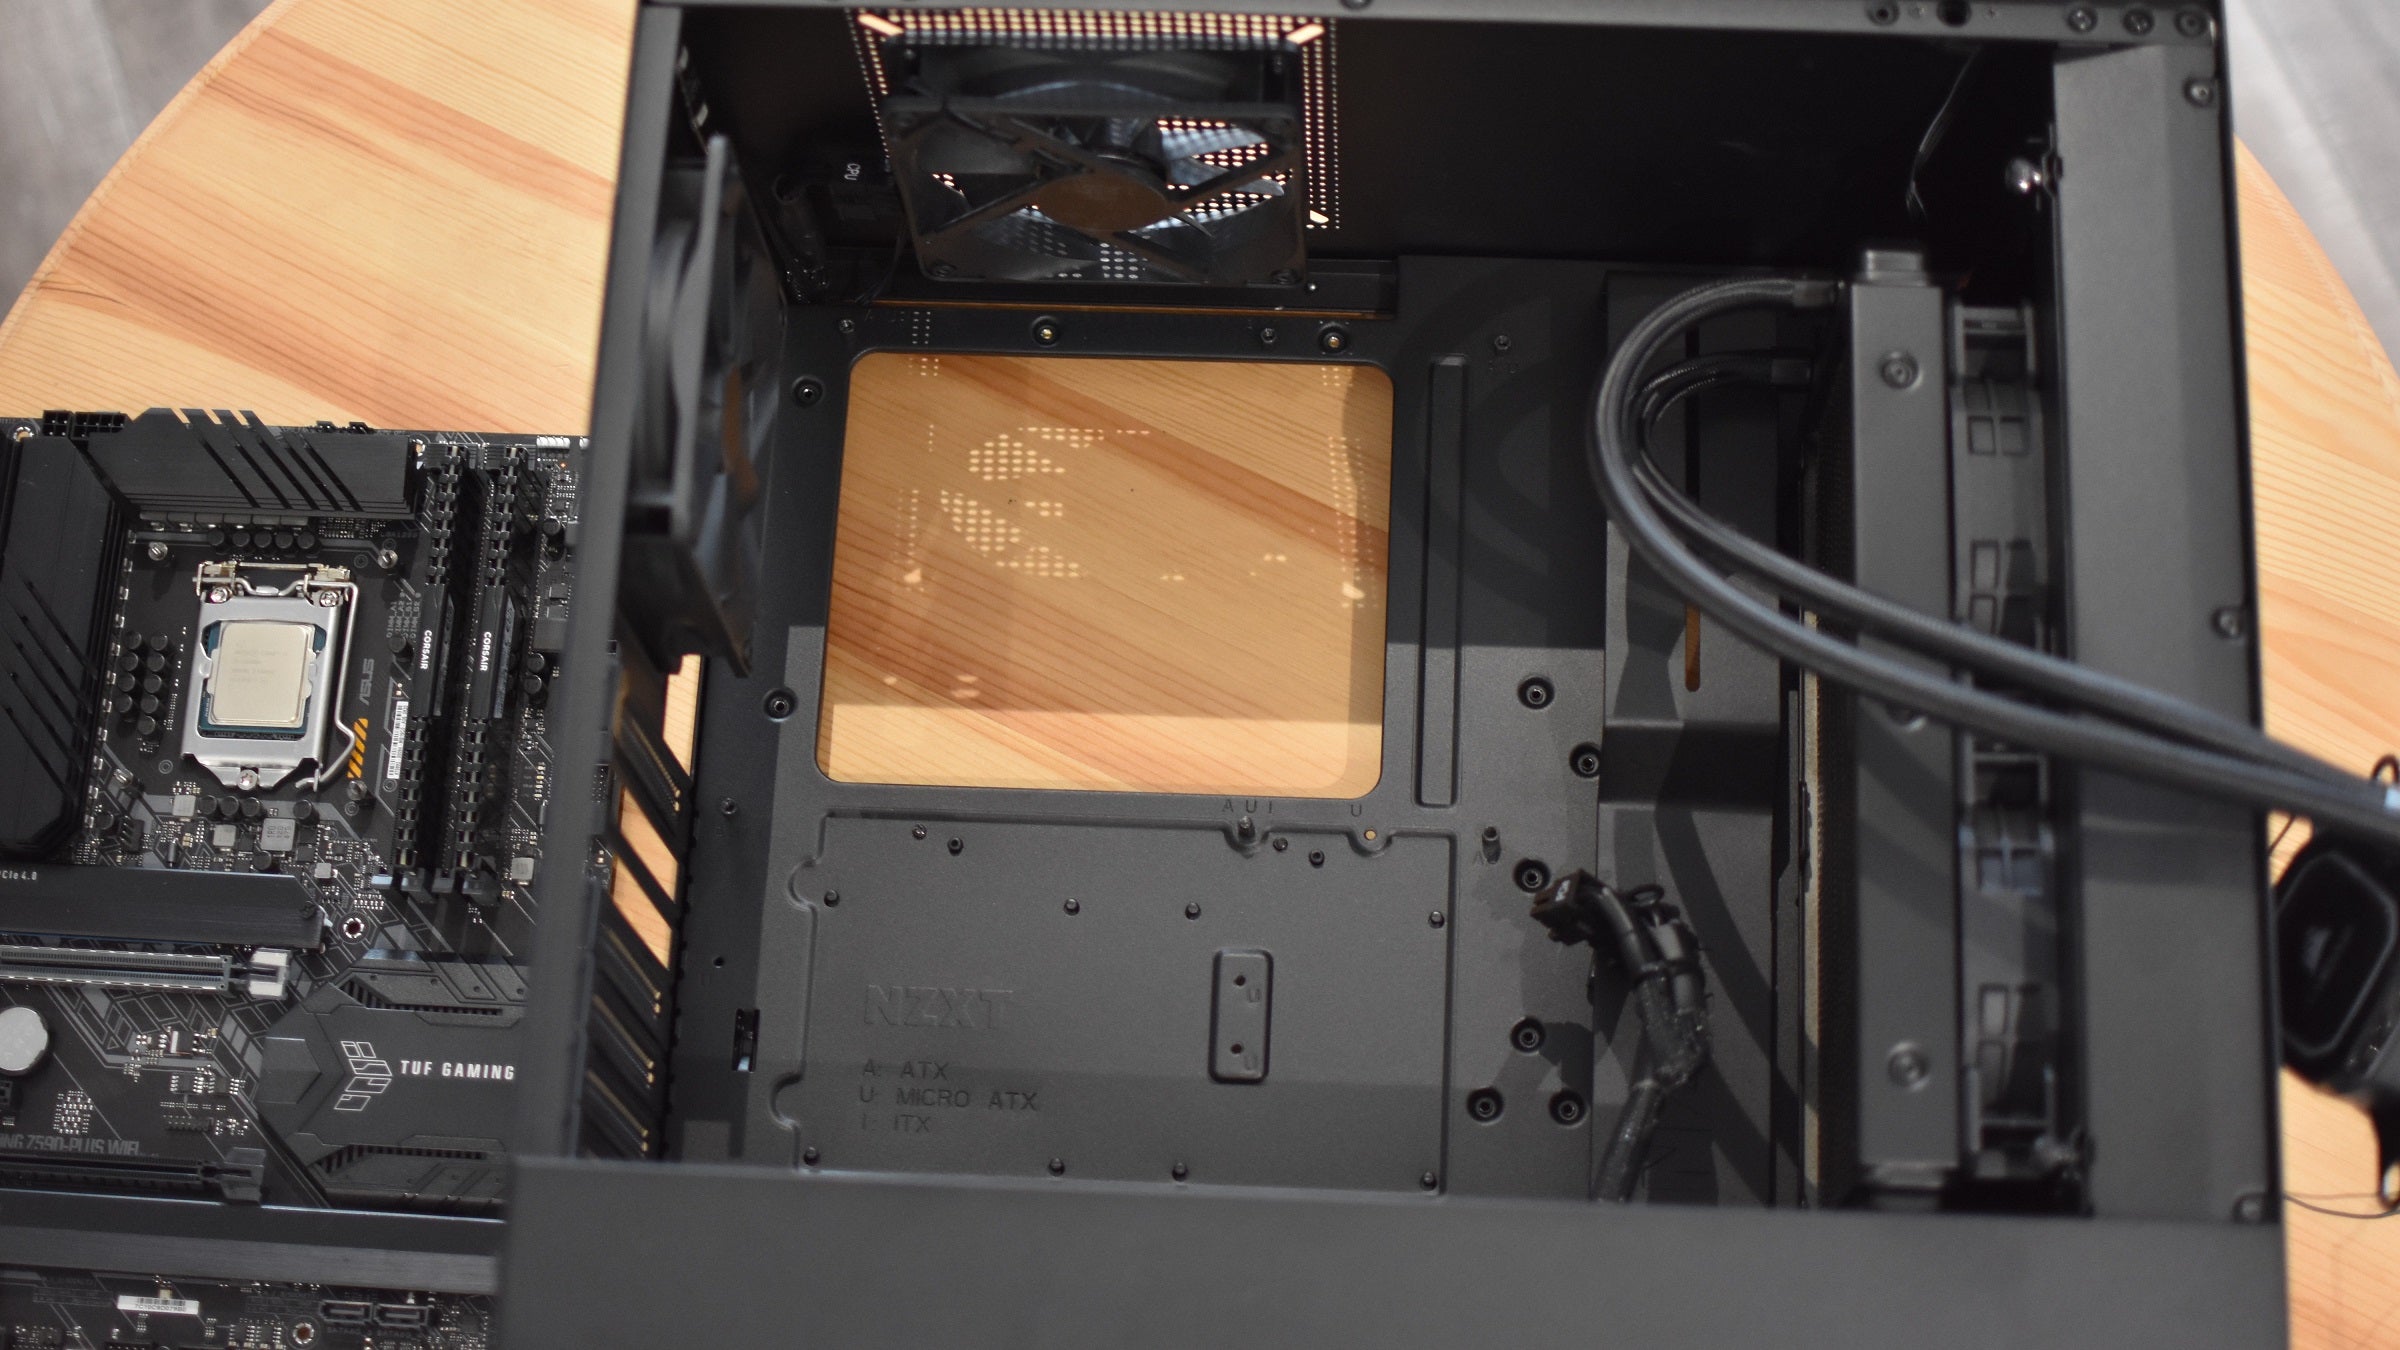 An empty PC case, showing the main internal chamber and motherboard tray. A motherboard sits next to the case on a table.